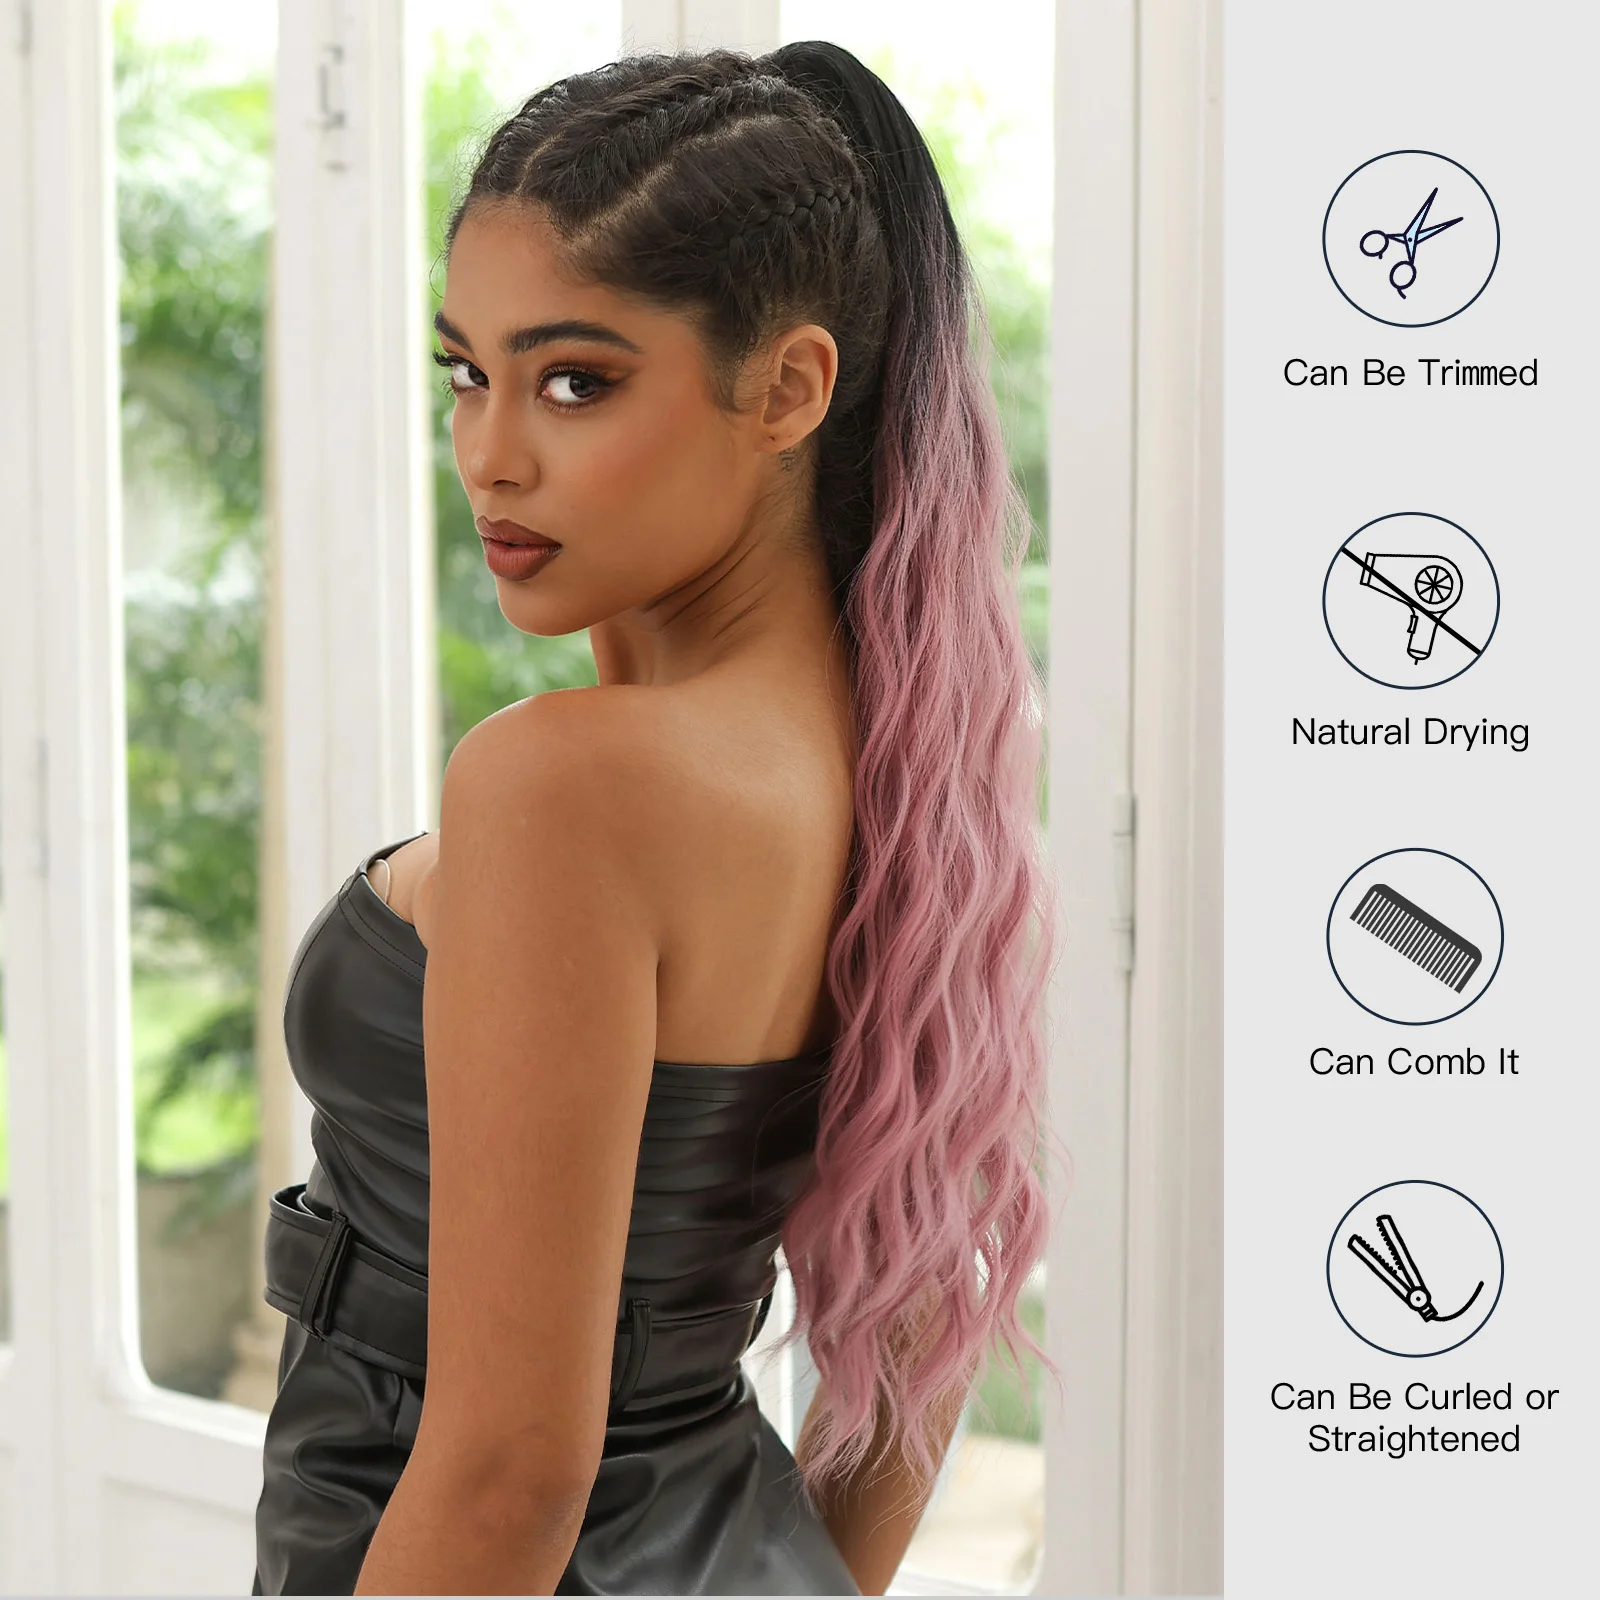 Pink Cheap Curly Ponytails with Clips